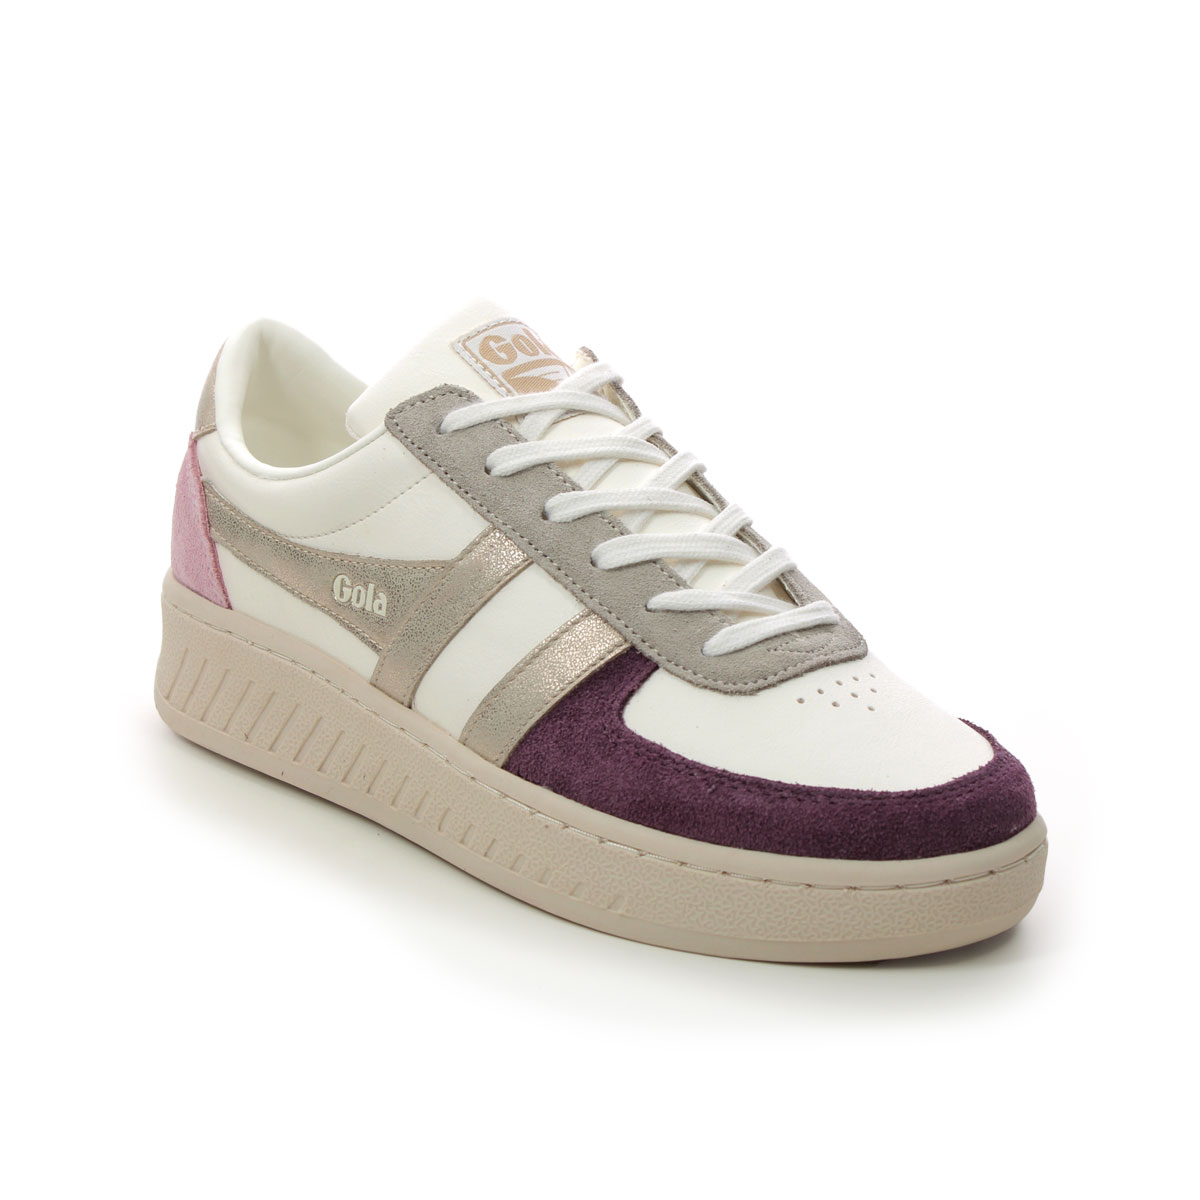 Gola Grandslam W White multi Womens trainers CLB207-ZR in a Plain Leather in Size 6